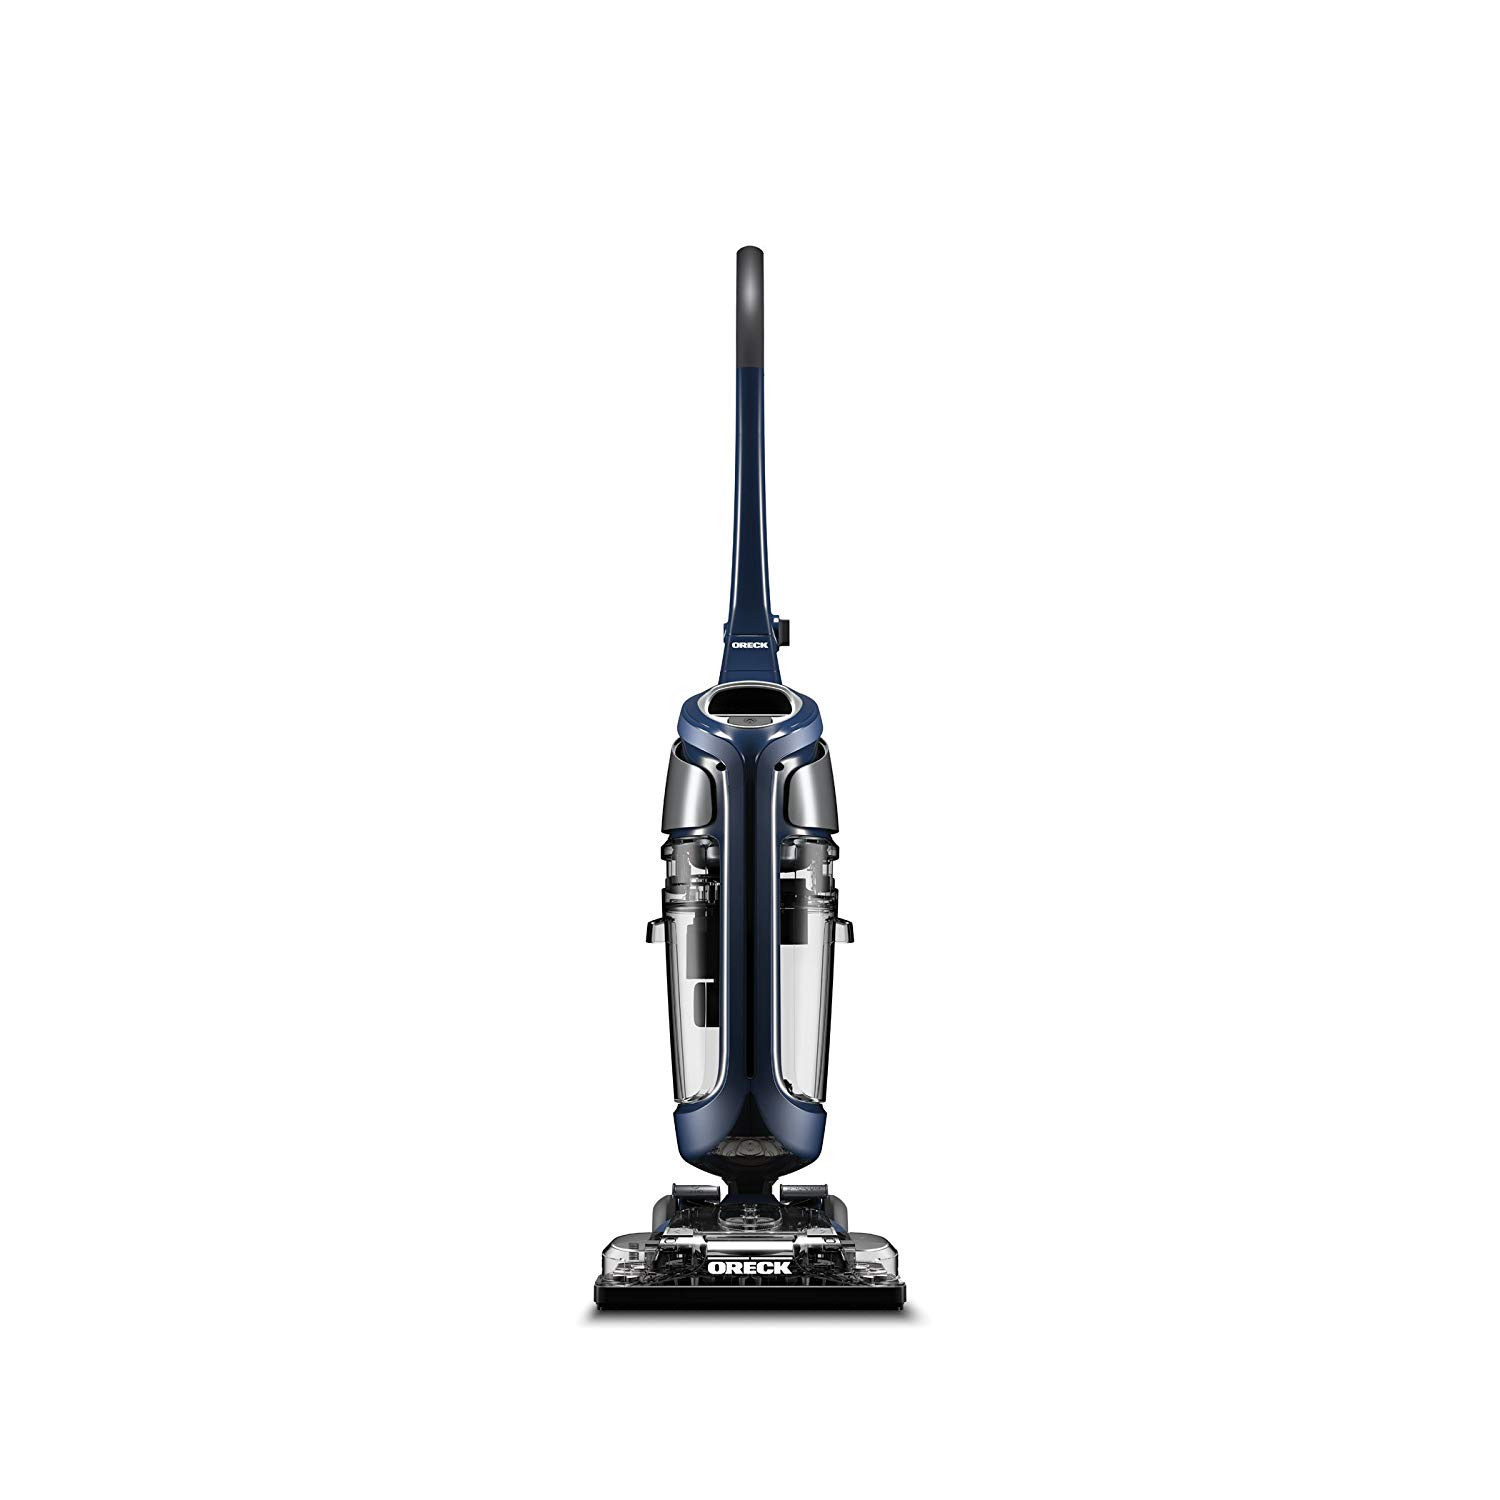 18 Unique Hardwood Floor Cleaning Machine Reviews 2024 free download hardwood floor cleaning machine reviews of amazon com oreck surface scrub hard floor cleaner corded home with regard to amazon com oreck surface scrub hard floor cleaner corded home kitchen